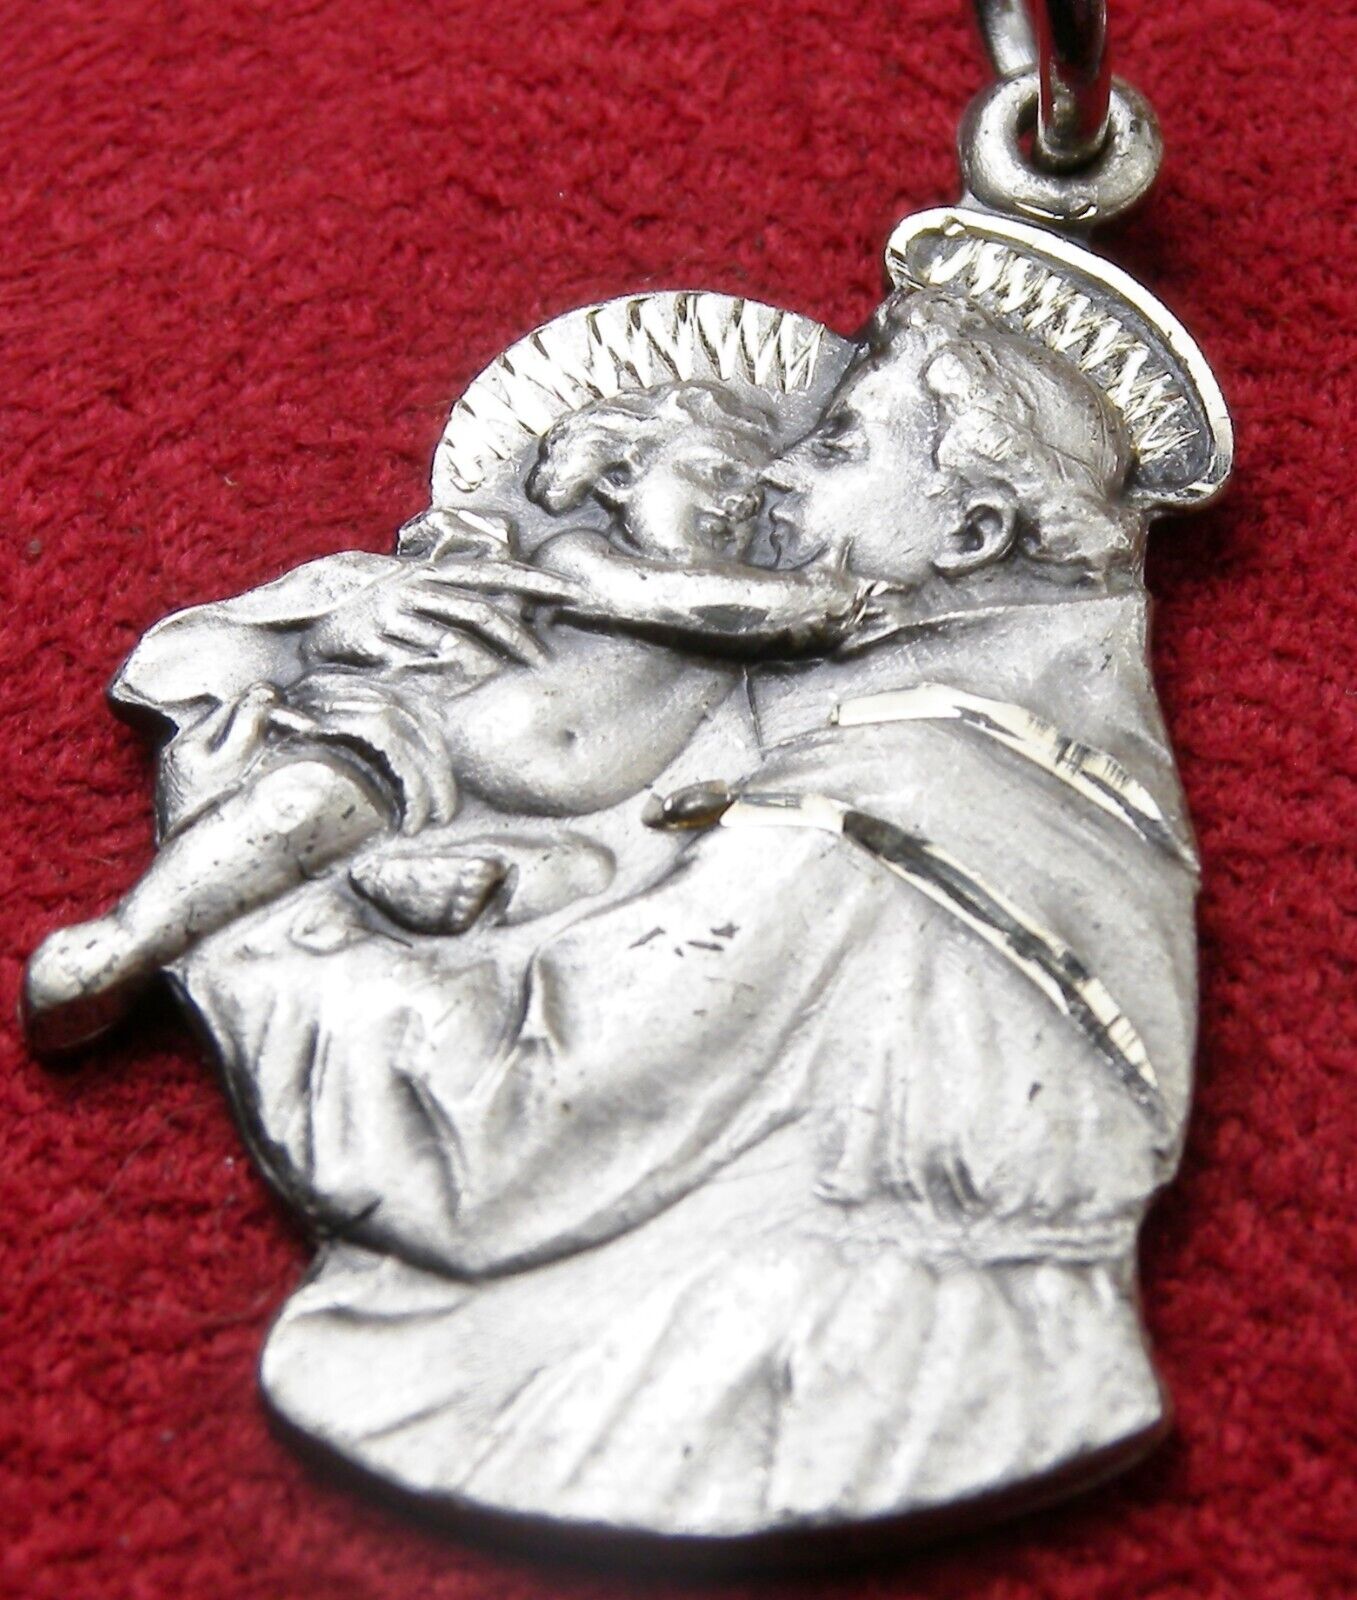 Vintage St Anthony's Tongue Relic Sterling Medal Finder of Lost Objects Husbands